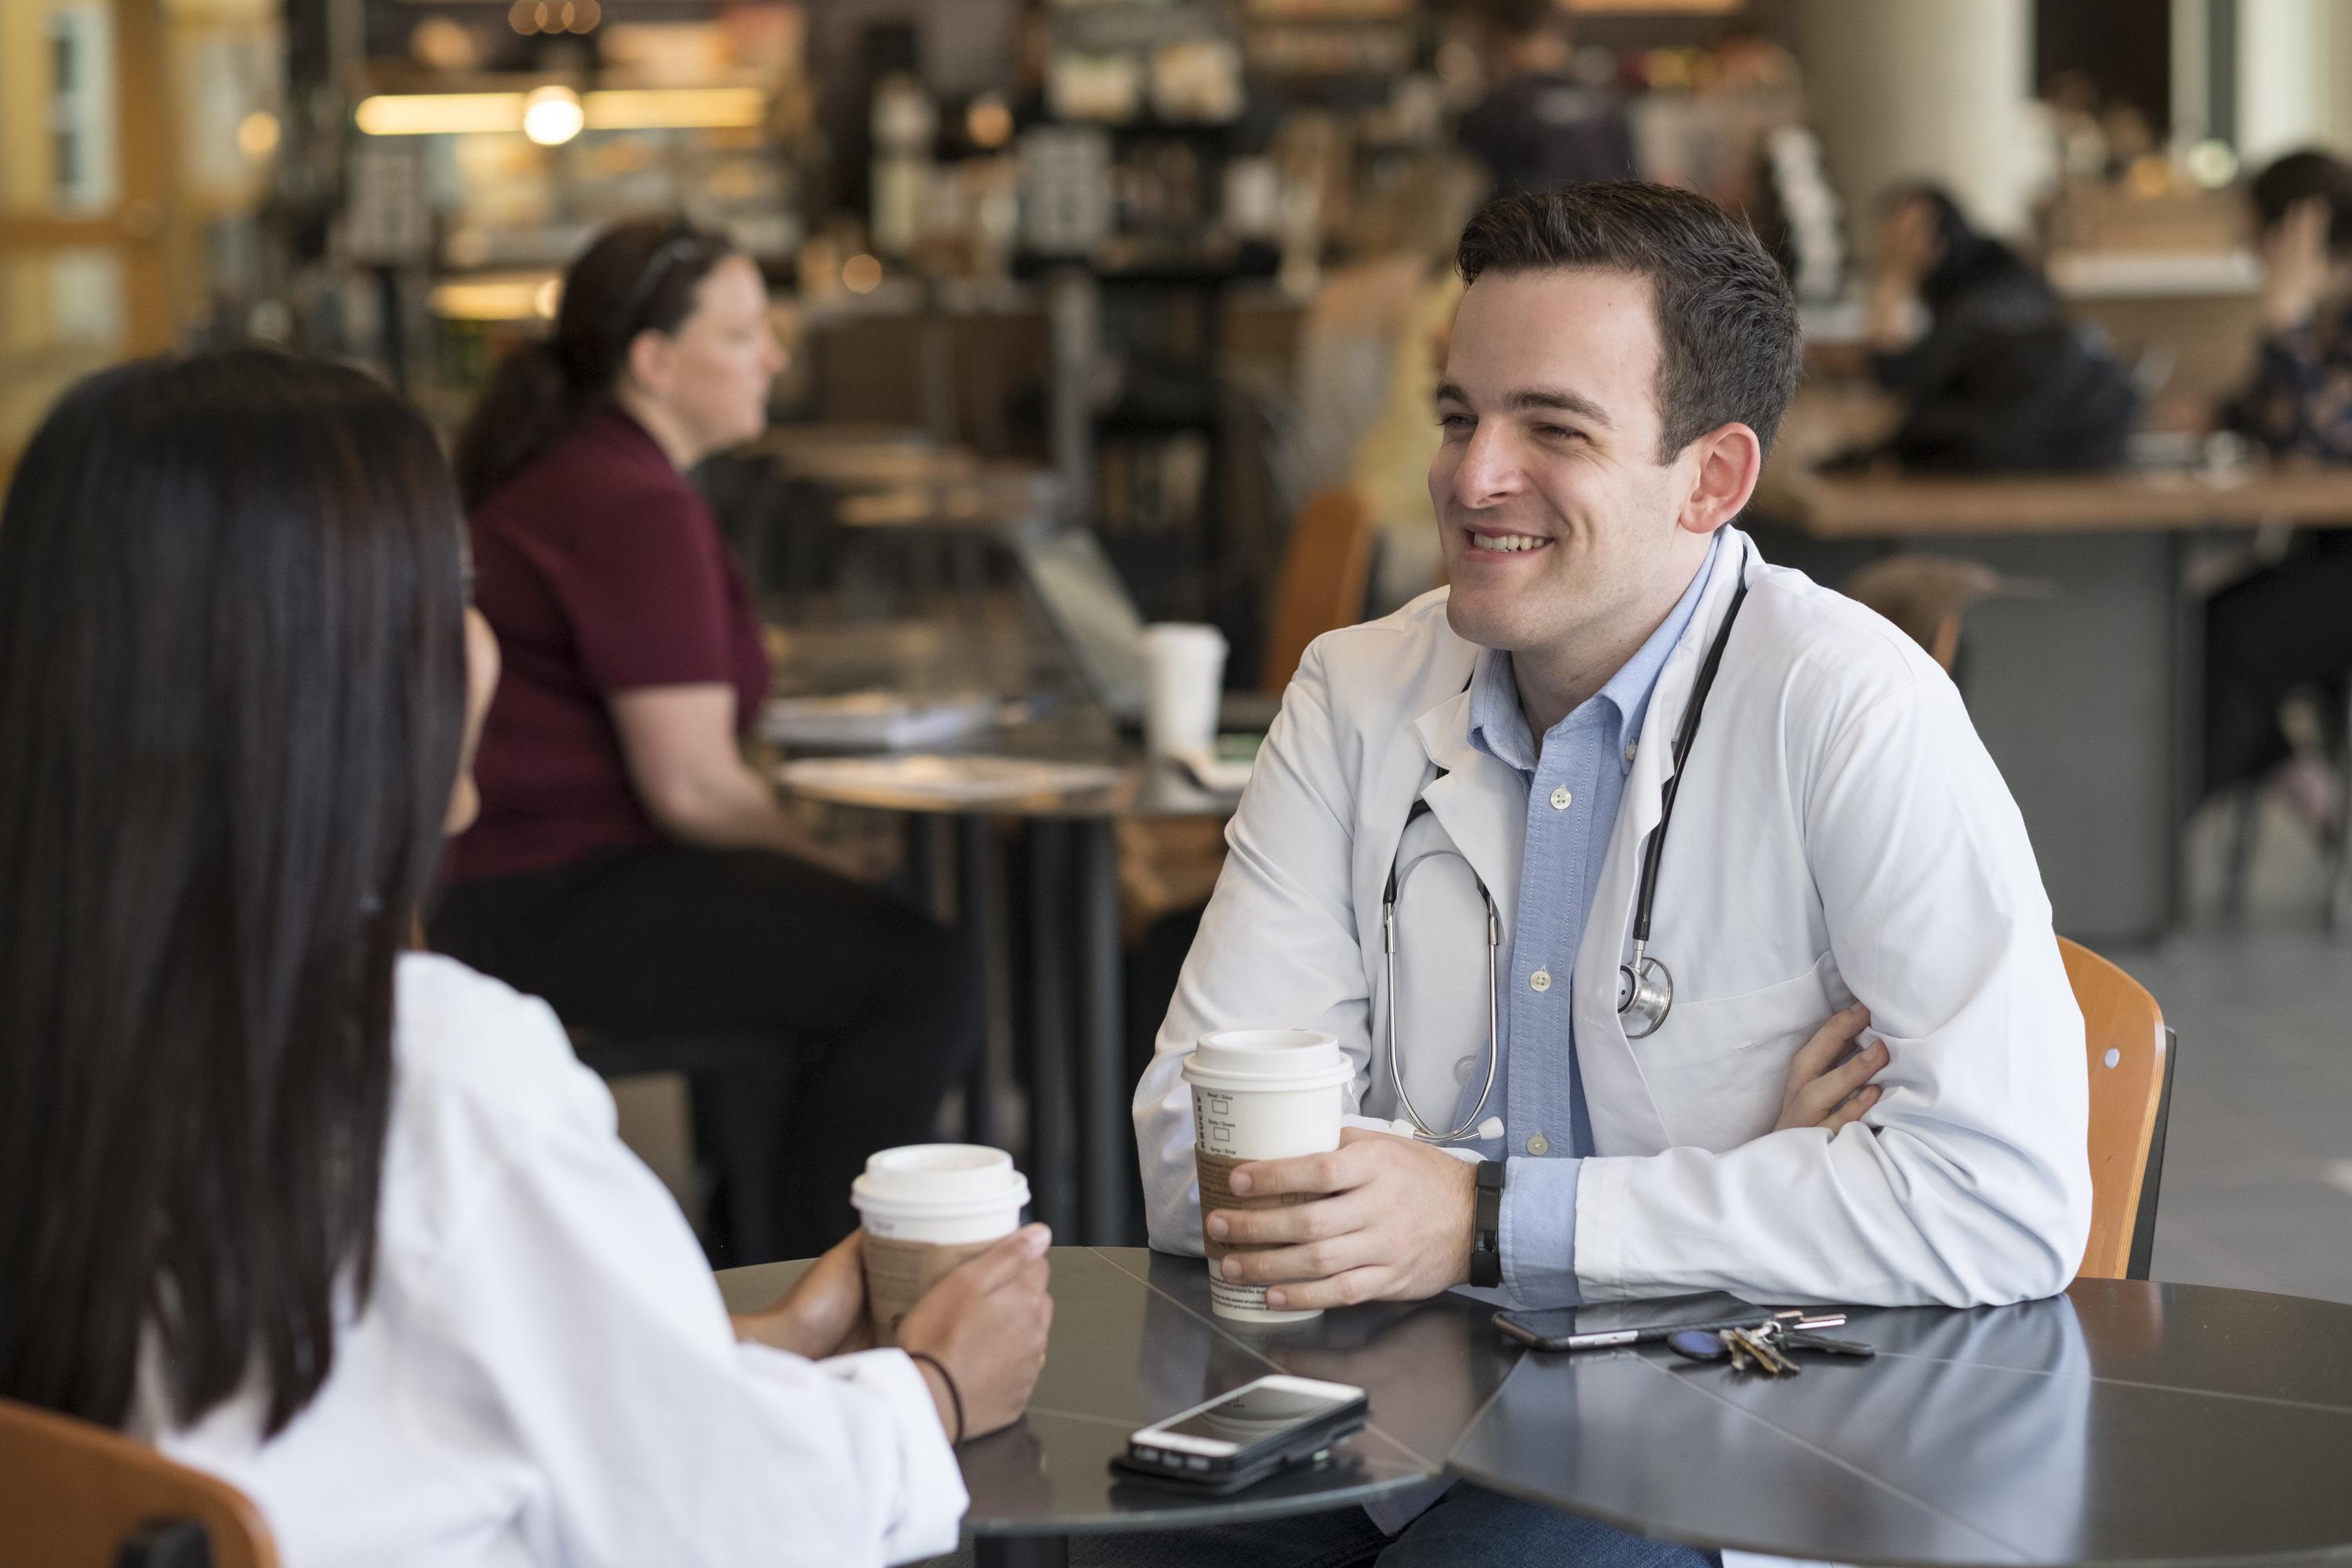 Med students having a coffee together